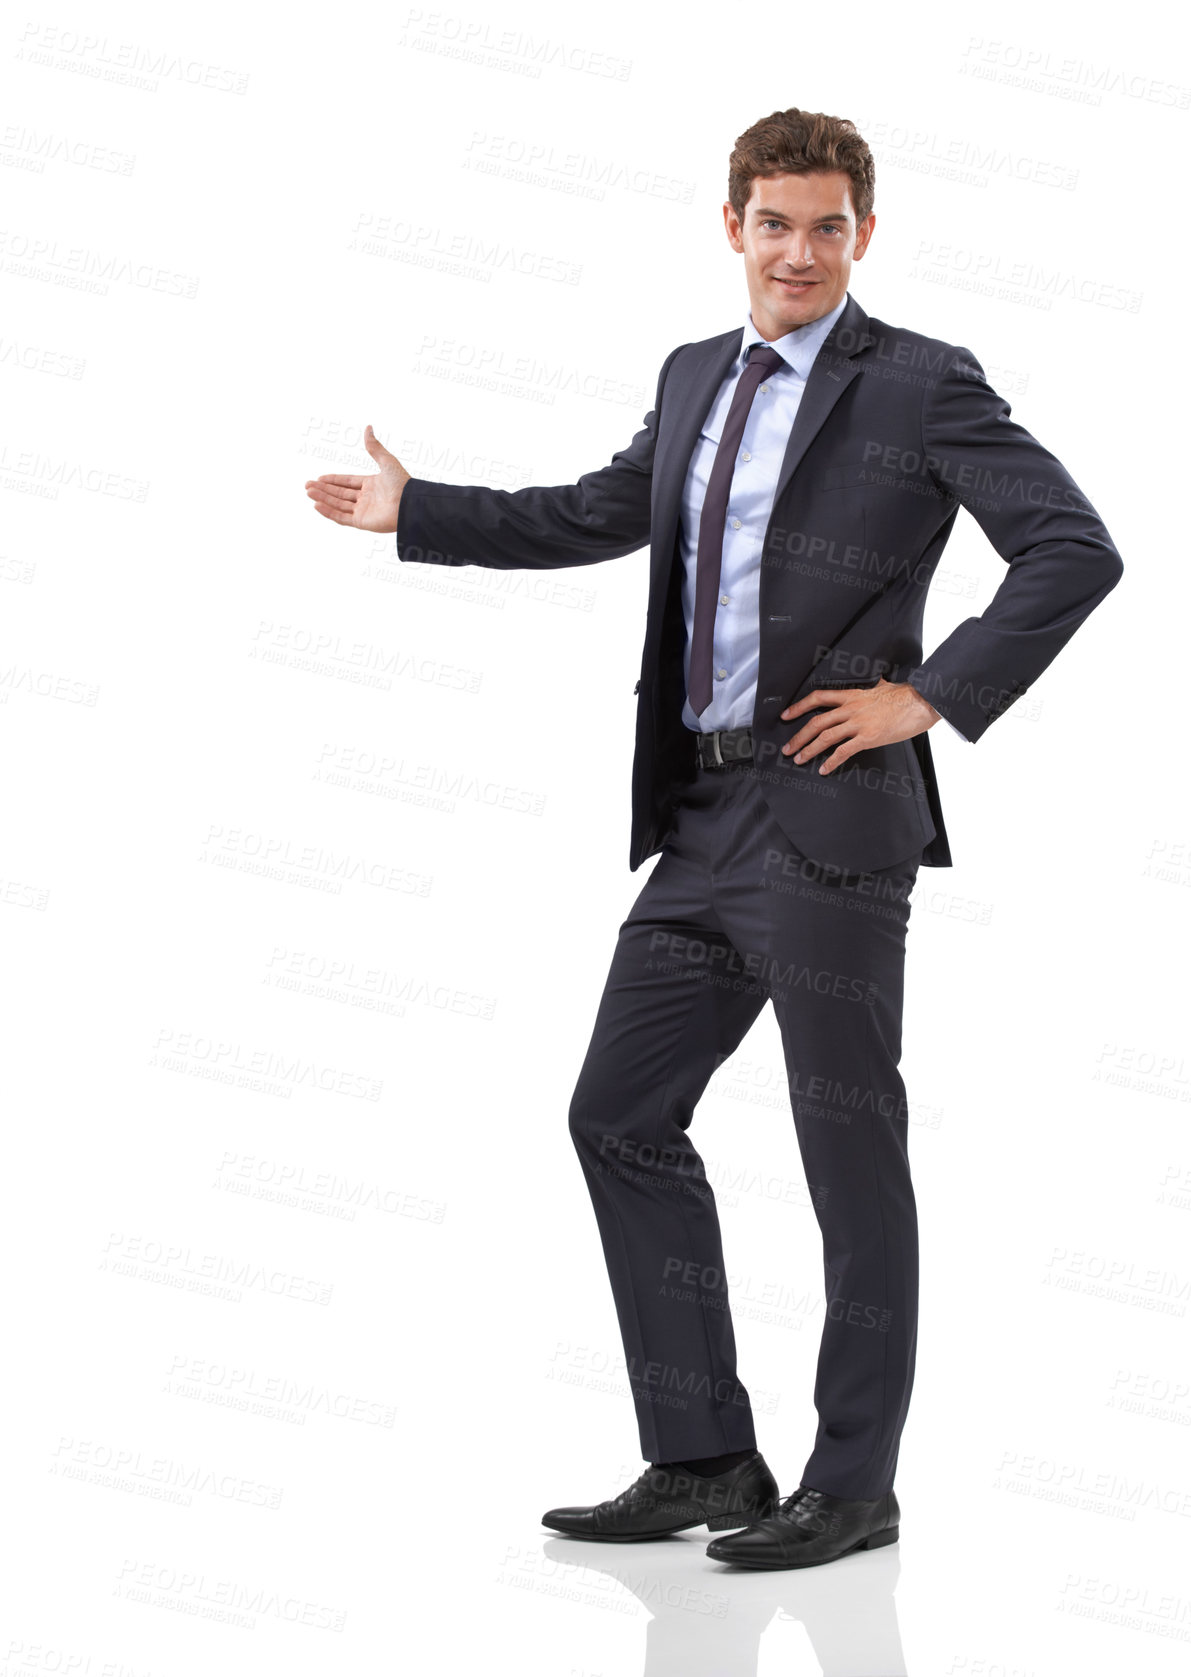 Buy stock photo Studio shot of a well dressed businessman showing you copyspace against a white background